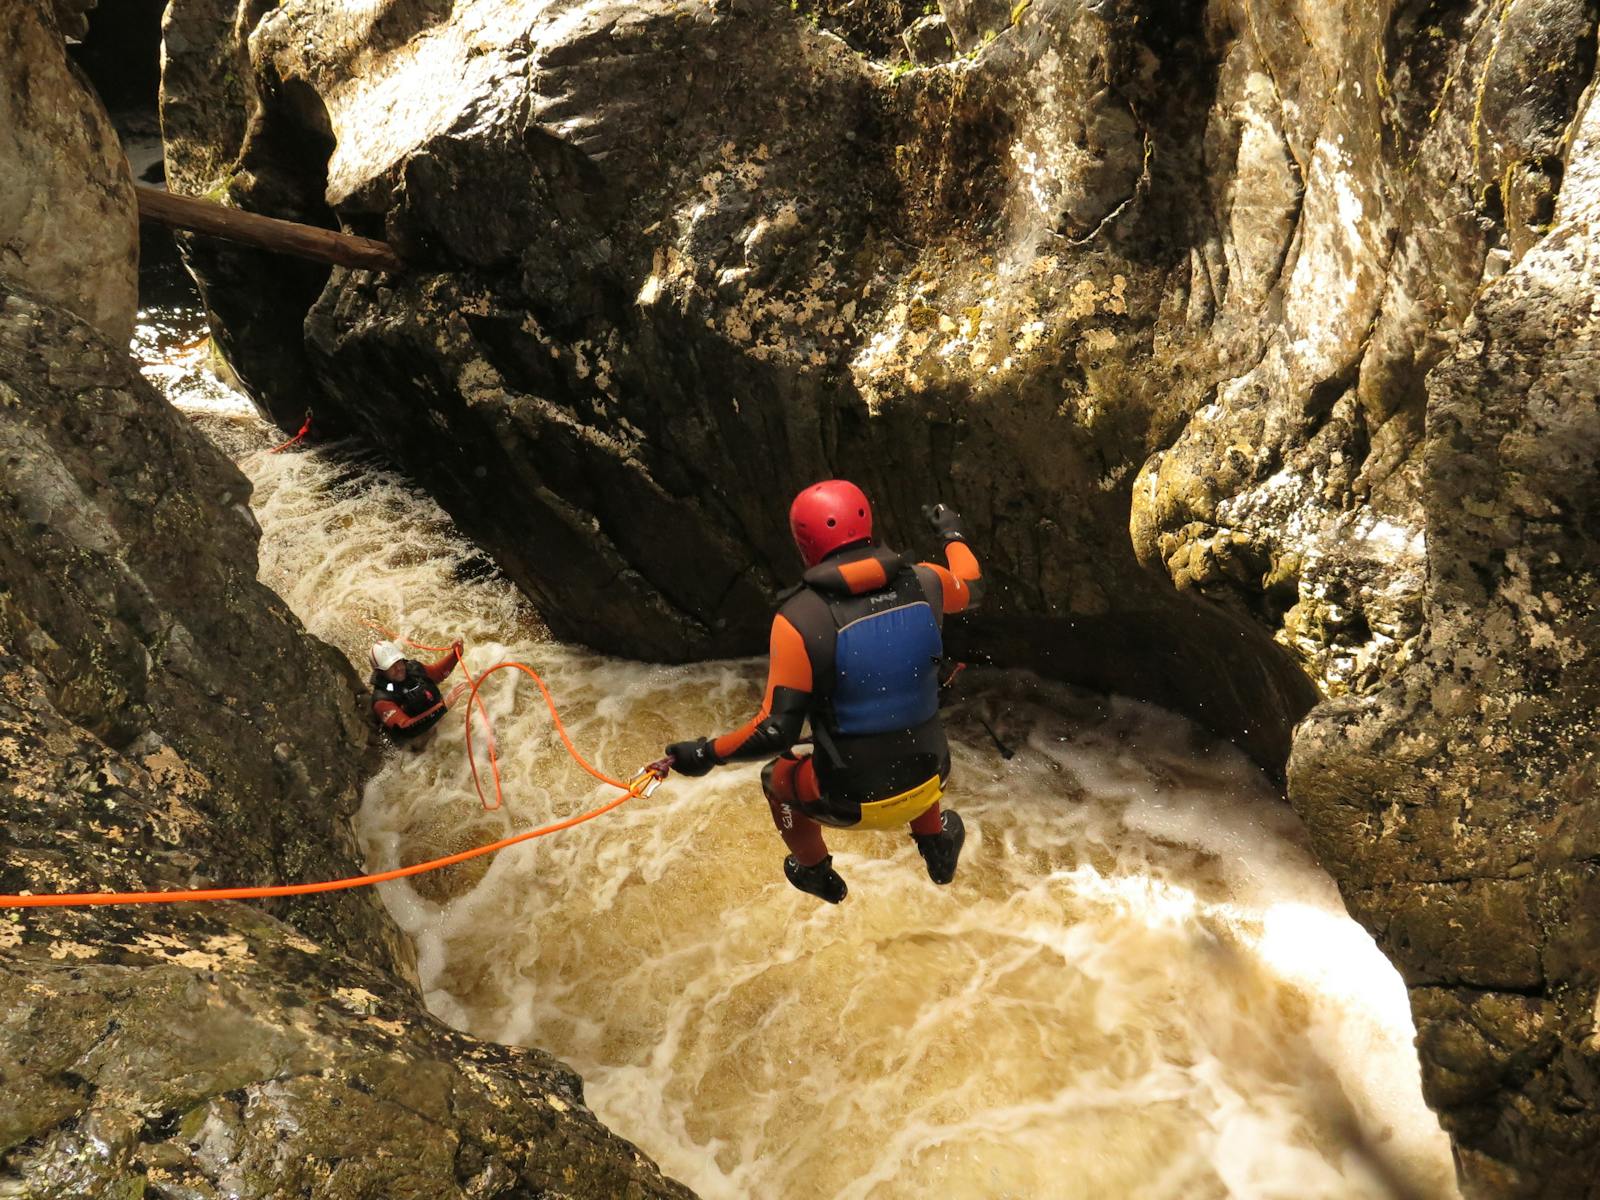 Canyoning at Cradle Mountain. Jumping off Tea Cup Falls in Dove Canyon.